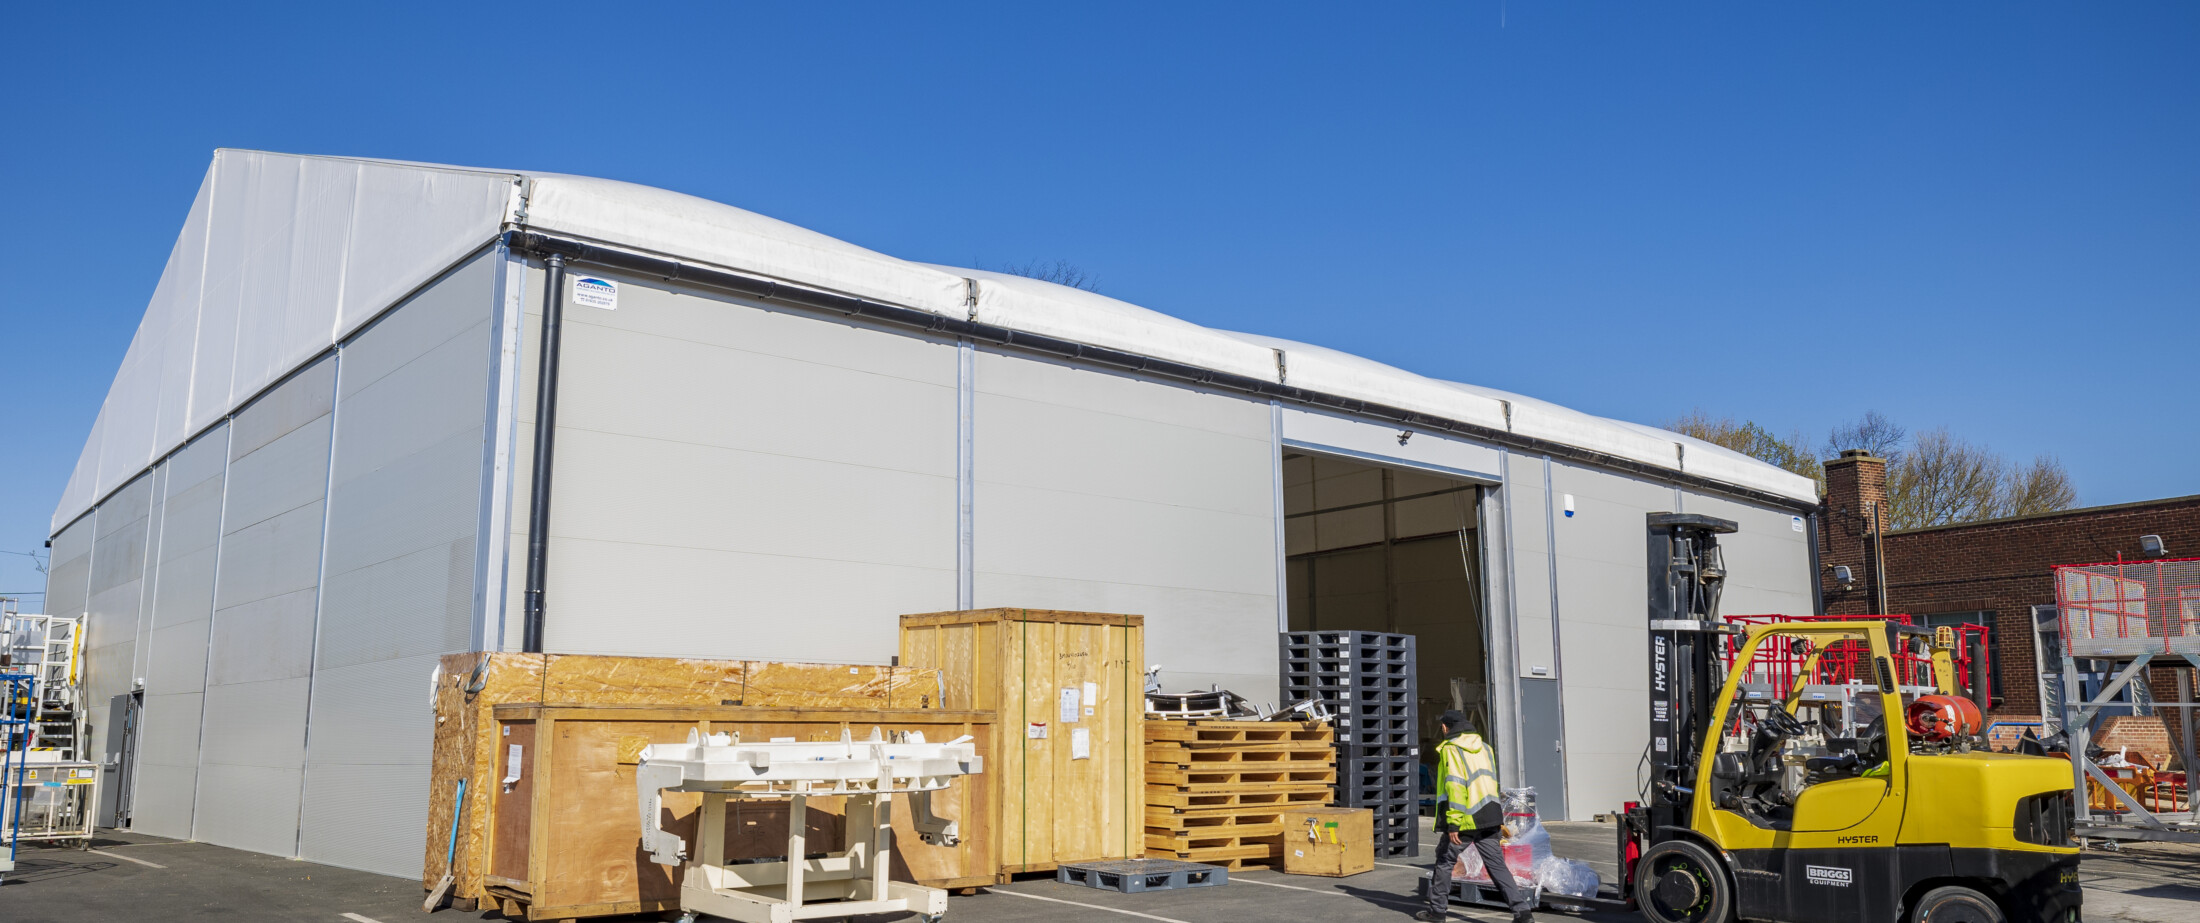 Temporary-warehouse-structure-for-inventory-at-Rolls-Royce